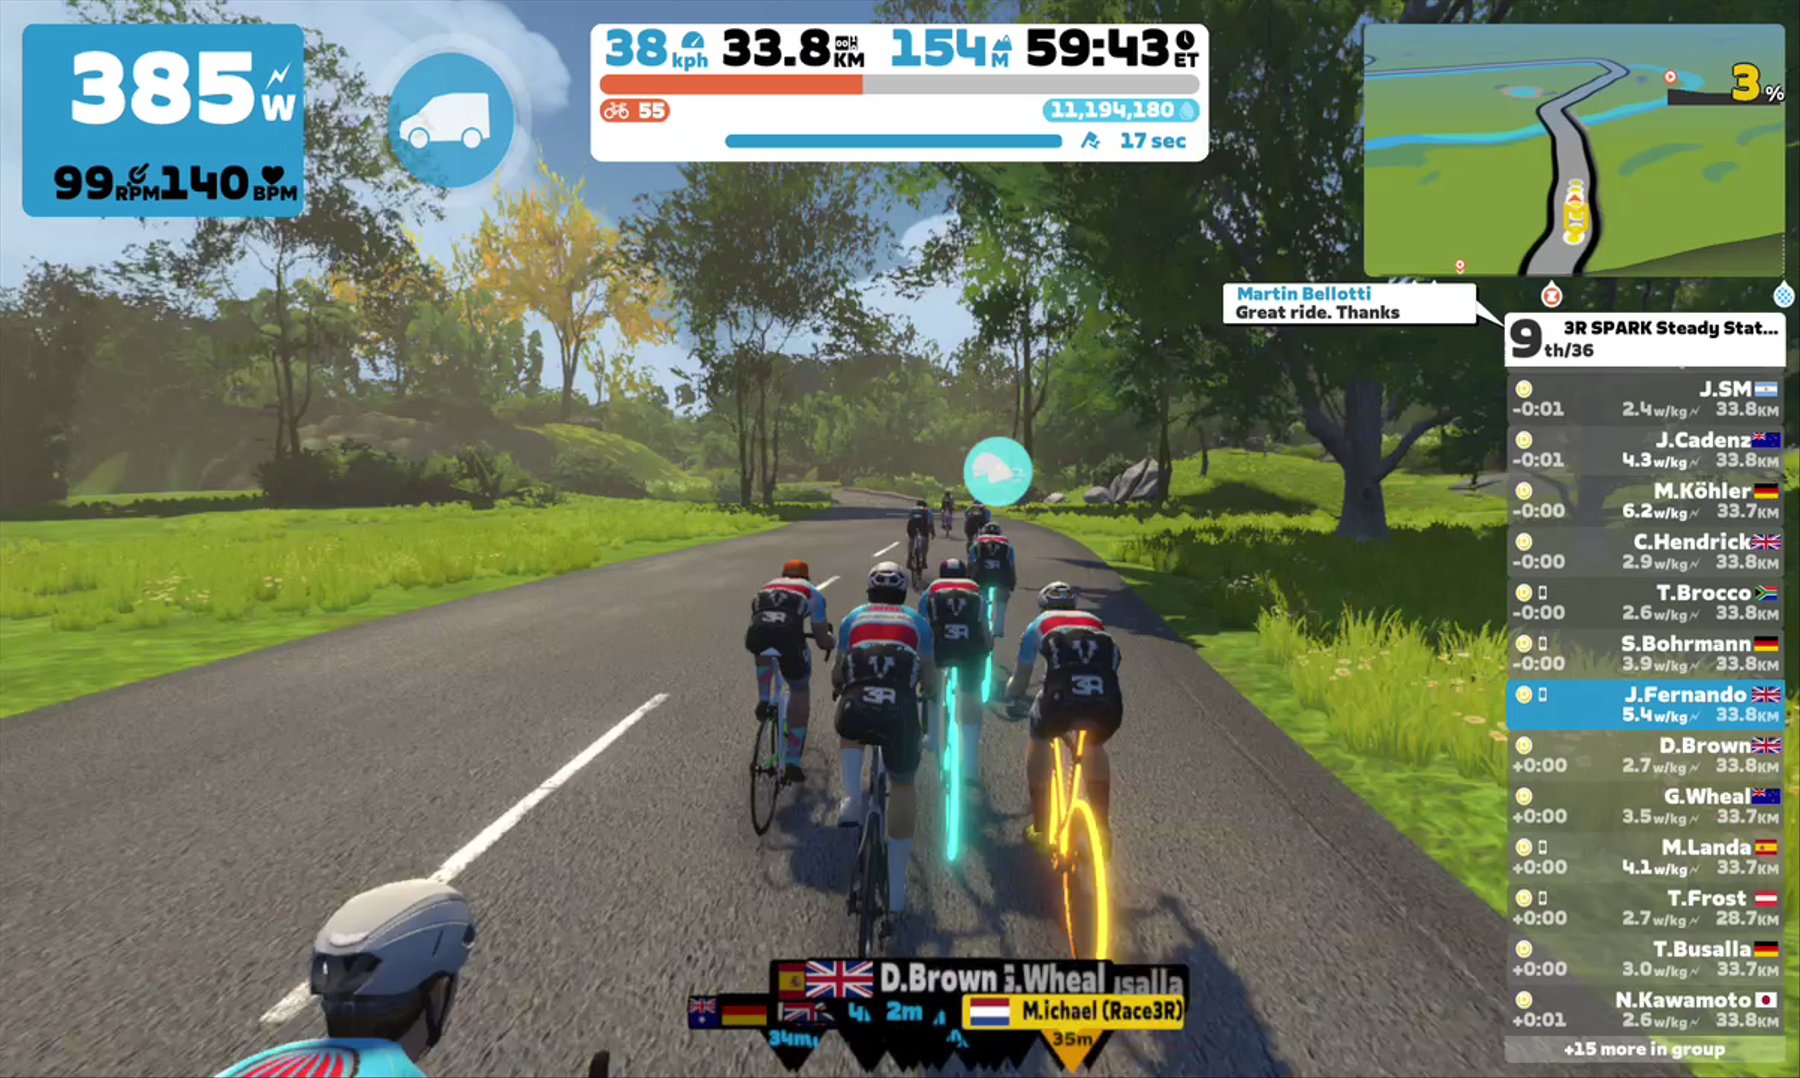 Zwift - Group Ride: 3R SPARK Steady State Ride on R.G.V. in France